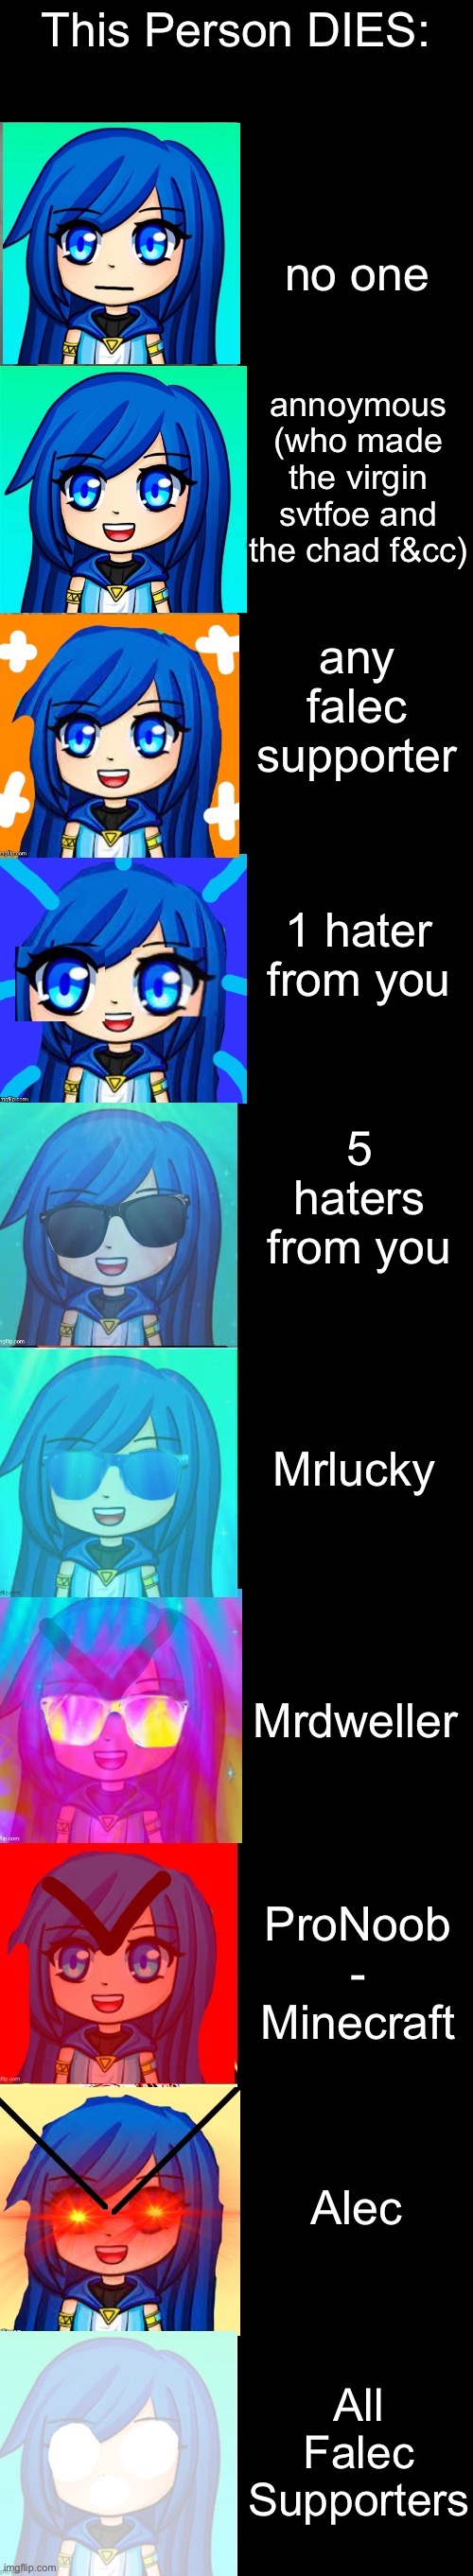 Tags? | This Person DIES:; no one; annoymous (who made the virgin svtfoe and the chad f&cc); any falec supporter; 1 hater from you; 5 haters from you; Mrlucky; Mrdweller; ProNoob - Minecraft; Alec; All Falec Supporters | image tagged in itsfunneh becoming canny,memes,funny,canny,meme,fun | made w/ Imgflip meme maker